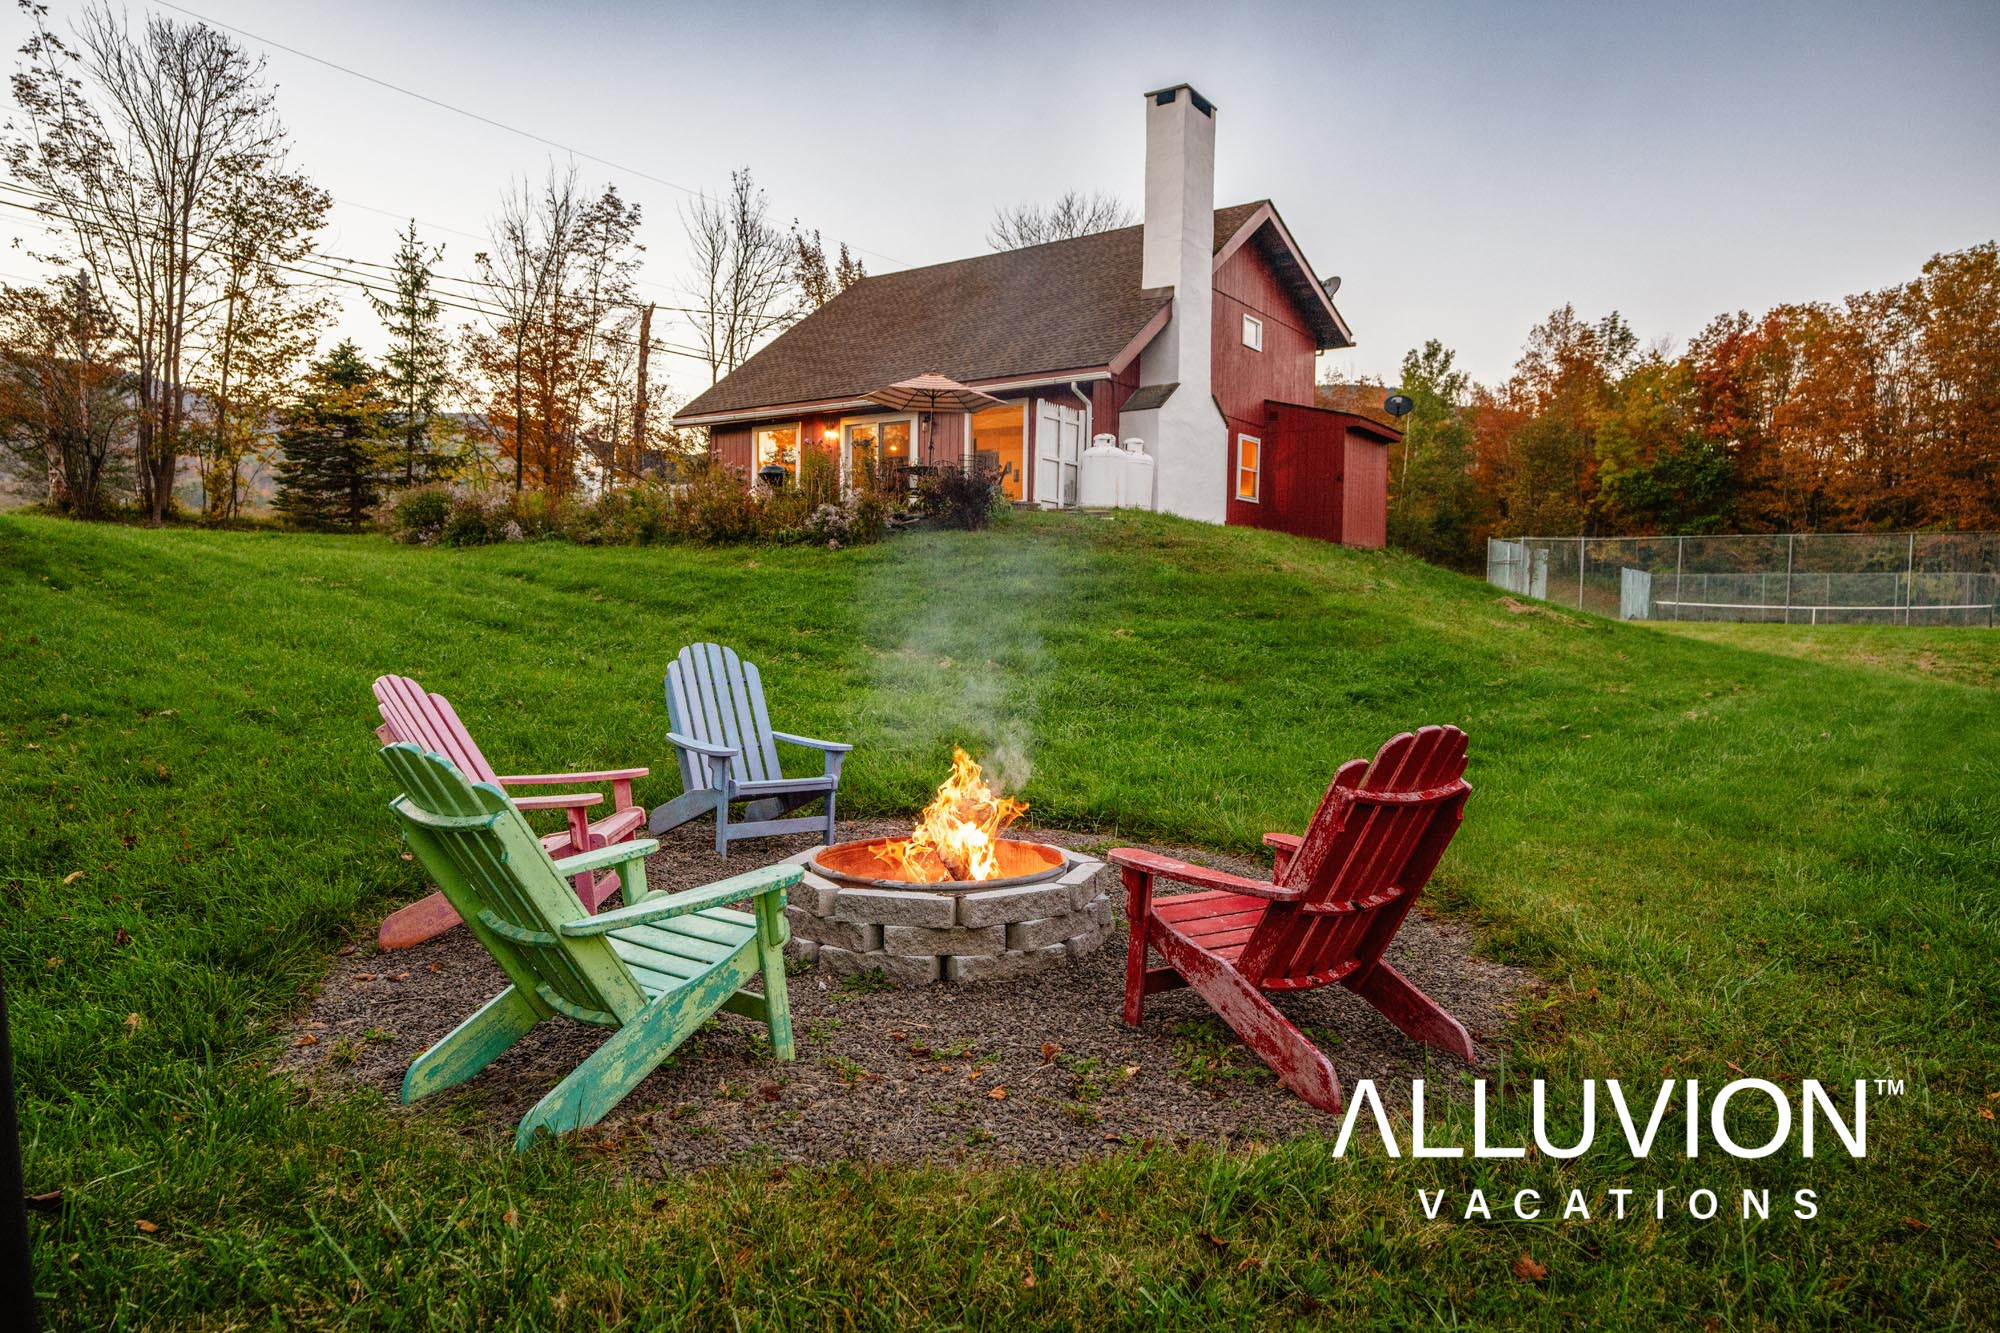 Experience Nature's Best of Catskill Mountains with Alluvion Vacations: A Wellness-Focused Retreat in Windham, NY – Photography by Maxwell Alexander for Alluvion Media